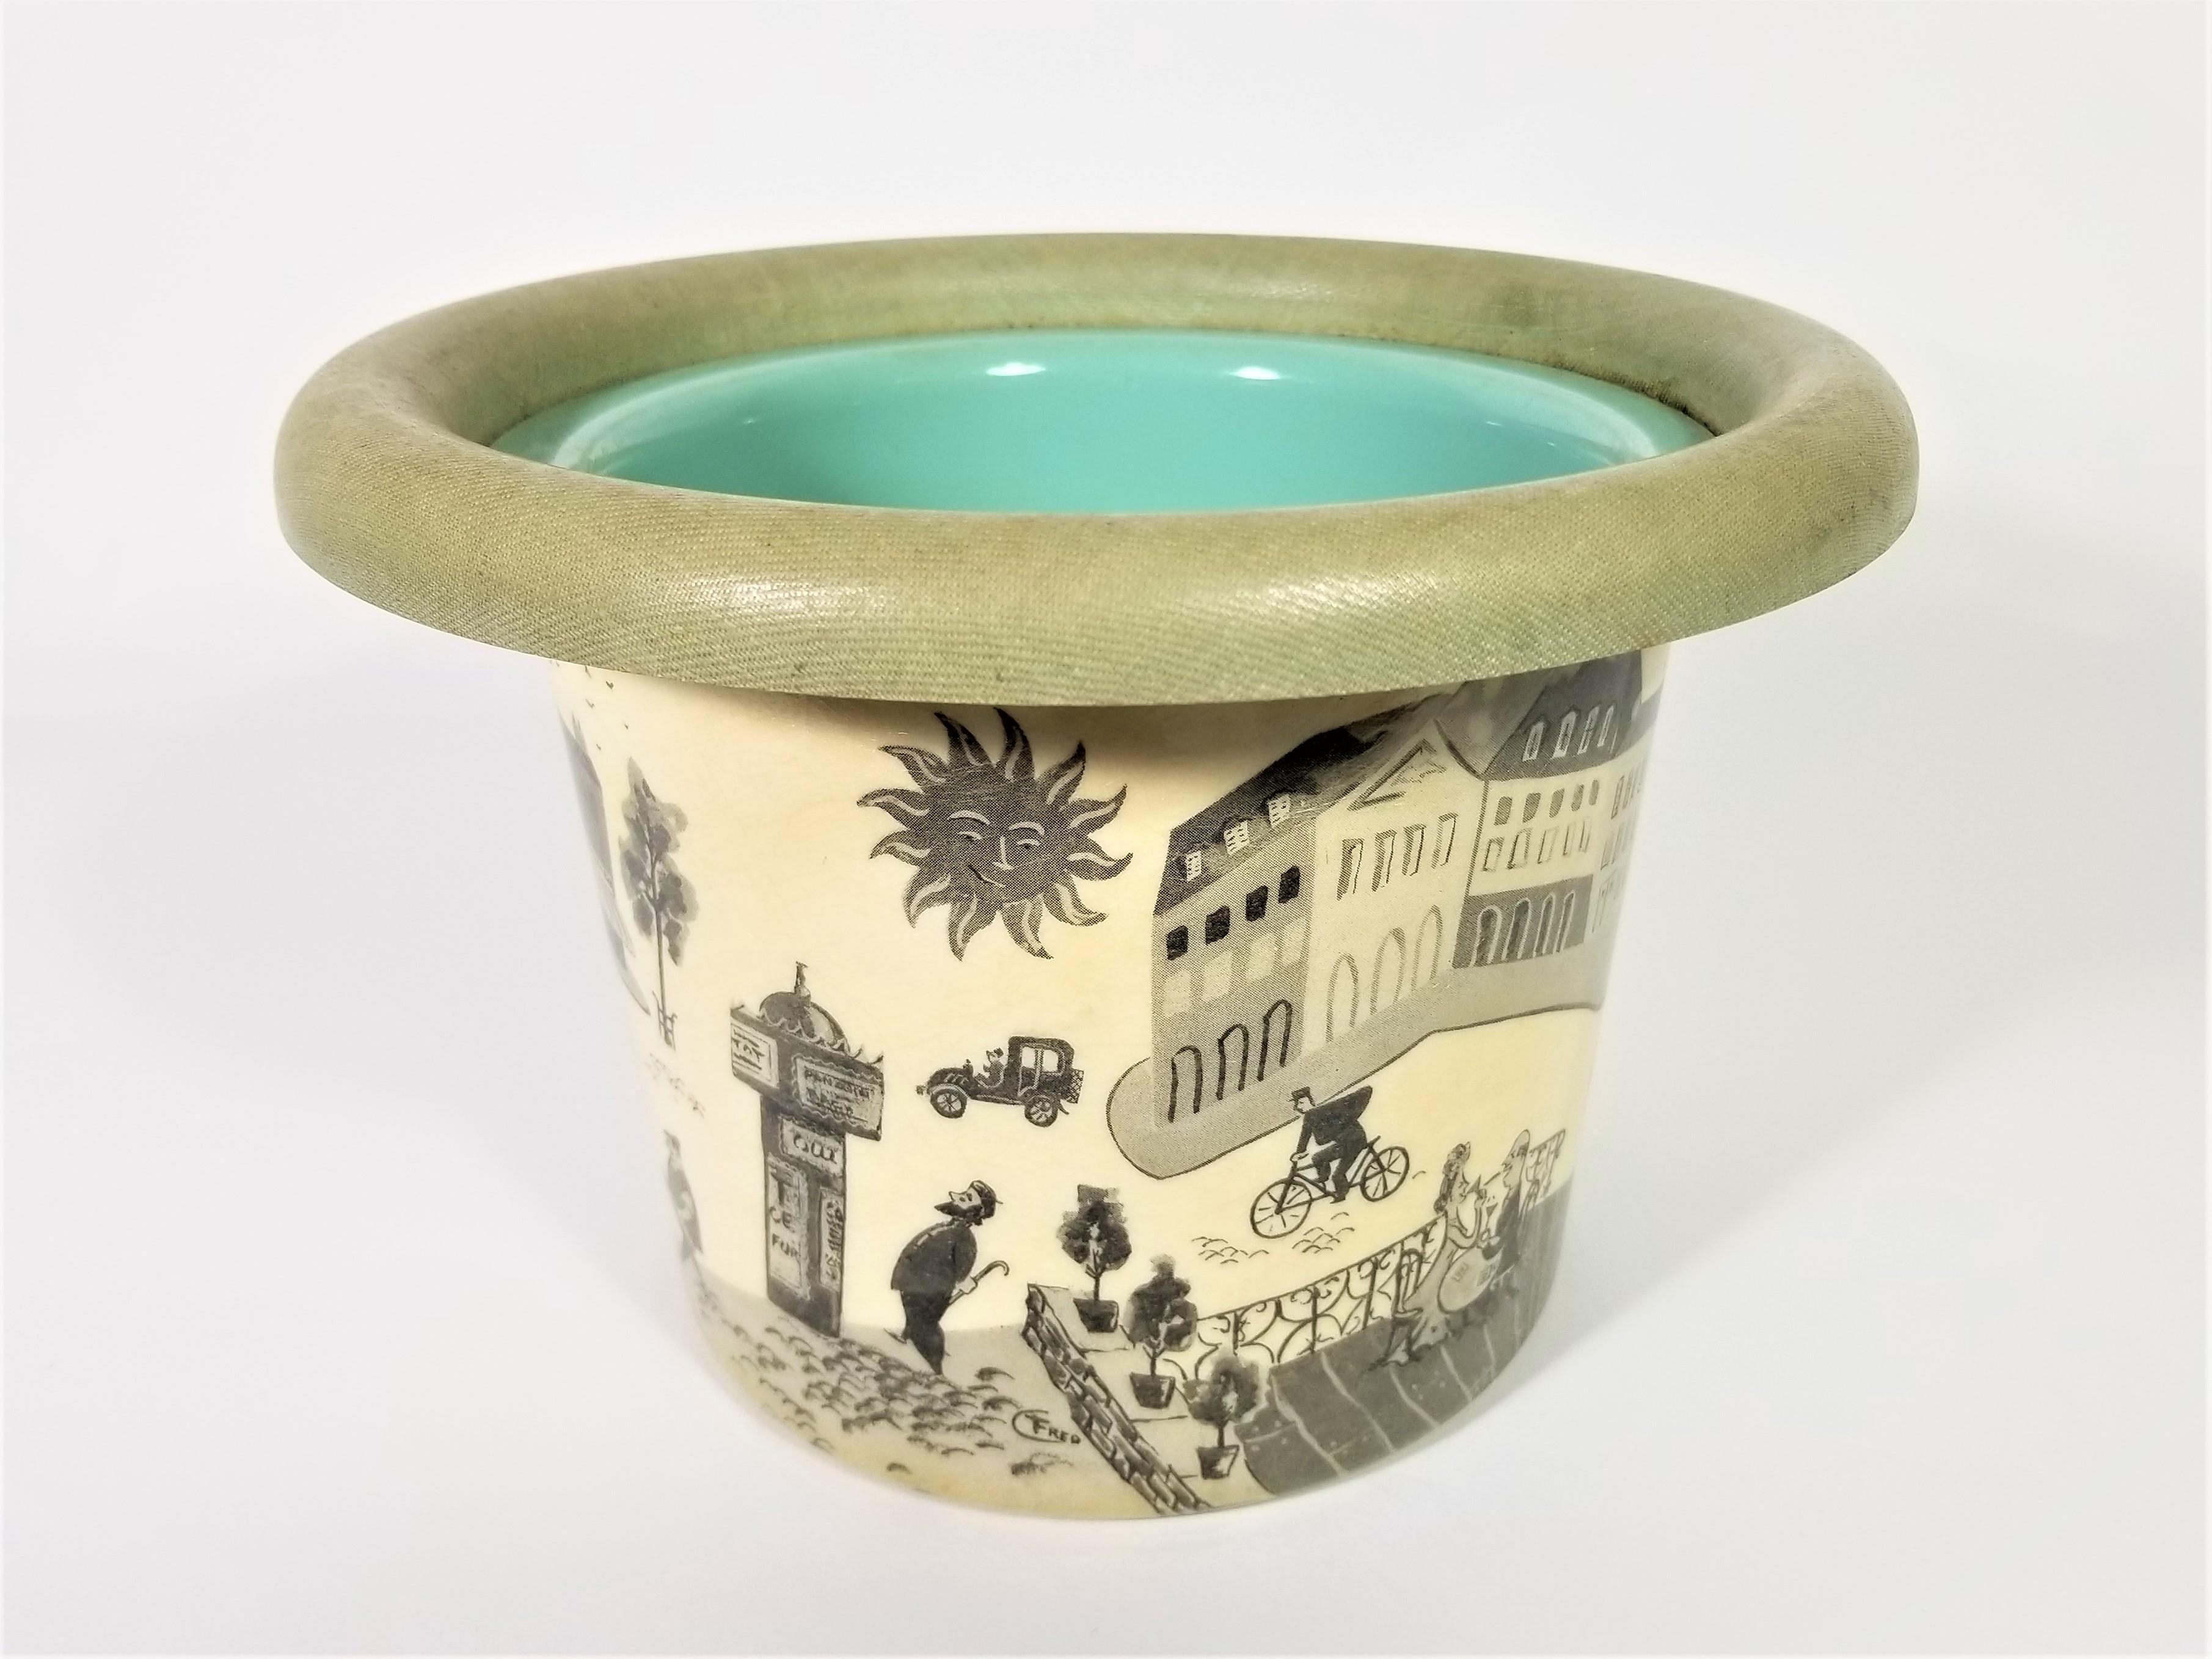 1950s midcentury fiberglass unique champagne bucket with detailed French scene illustrations.
  